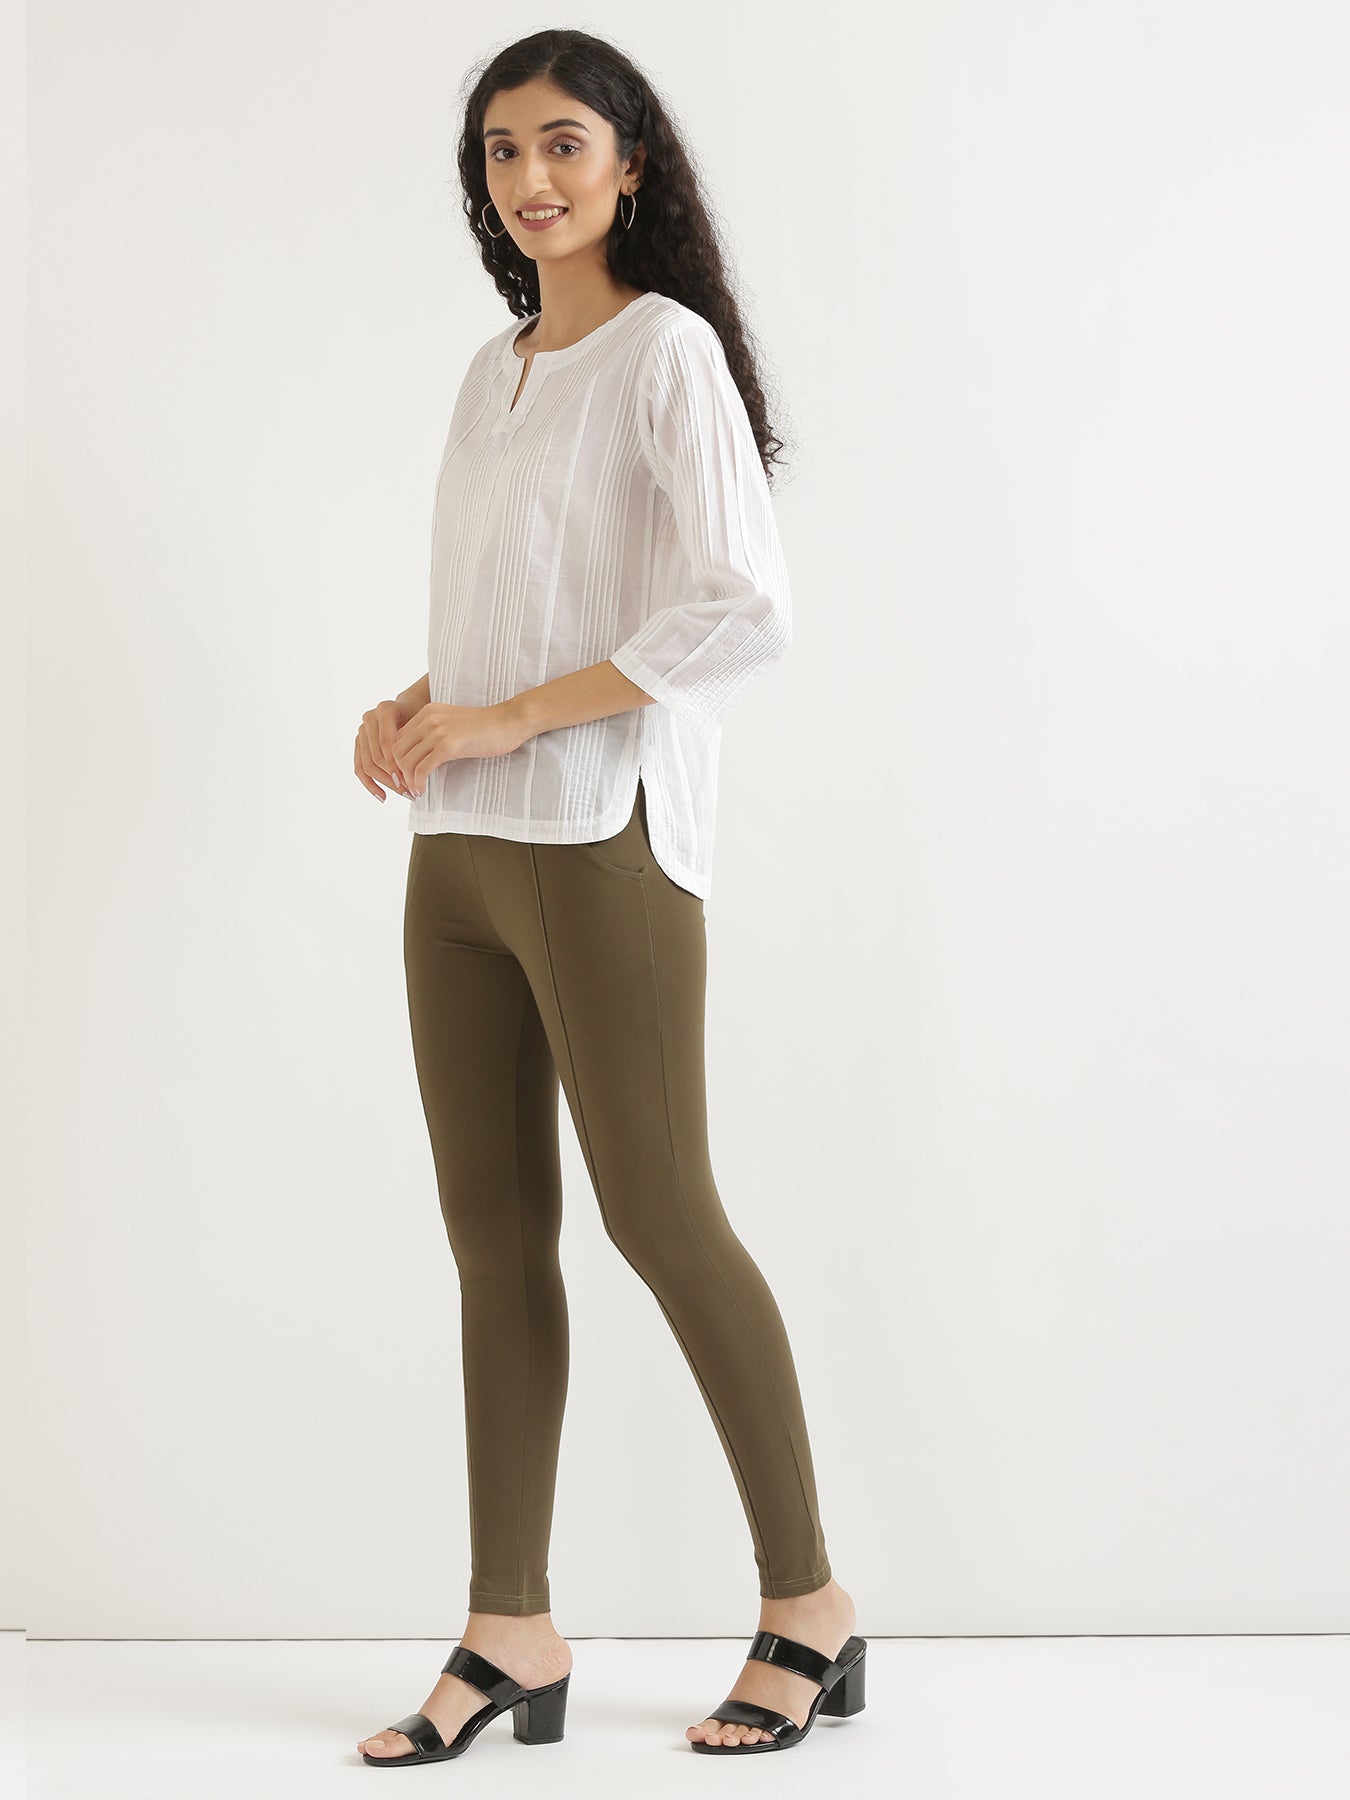 Olive Green 4-Way Stretchable Pants